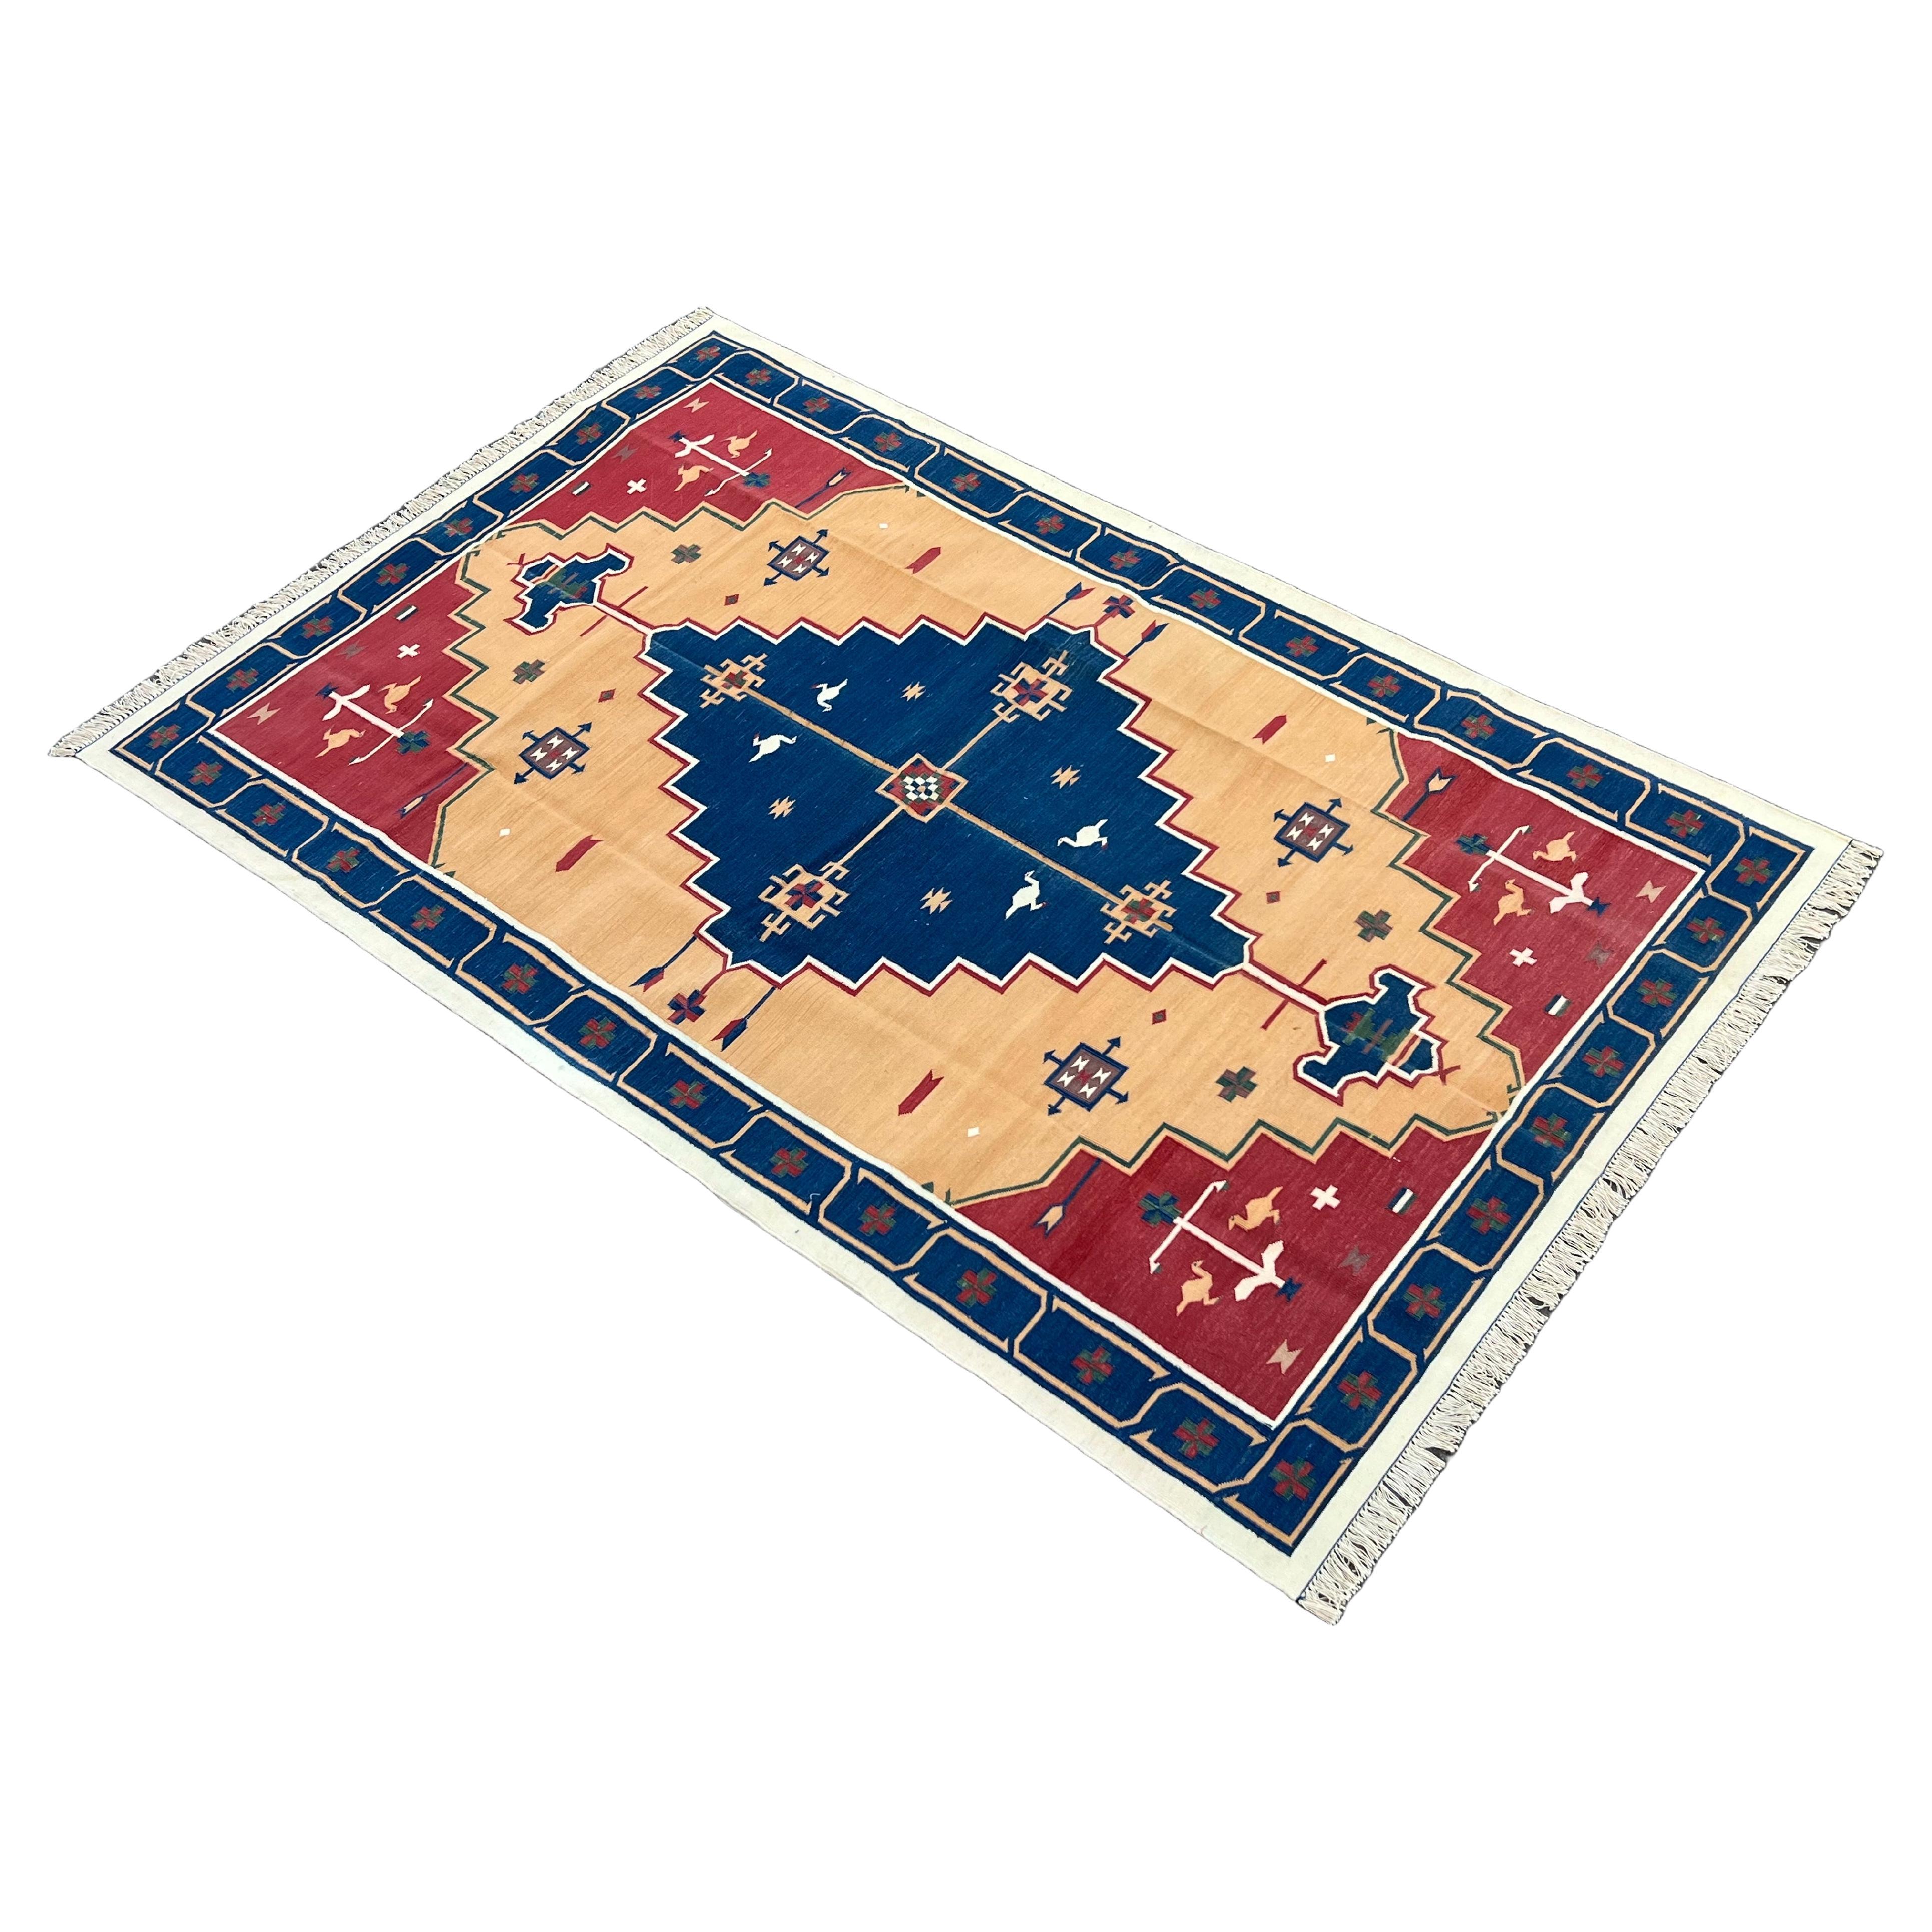 Handmade Cotton Area Flat Weave Rug, 5x8 Blue And Red Geometric Indian Dhurrie